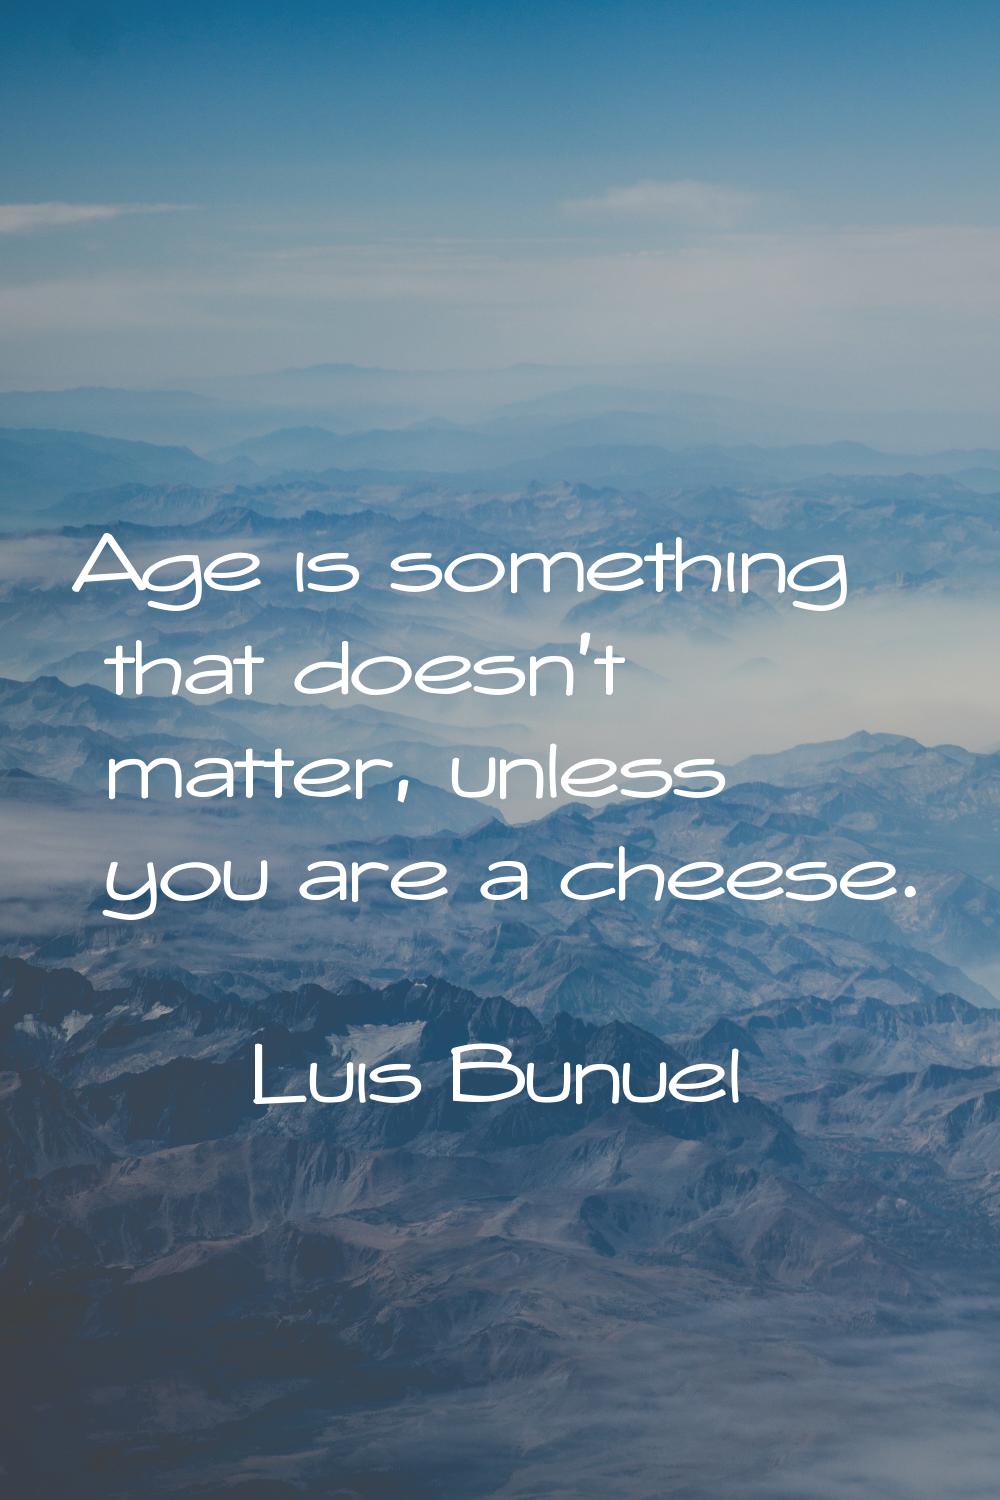 Age is something that doesn't matter, unless you are a cheese.